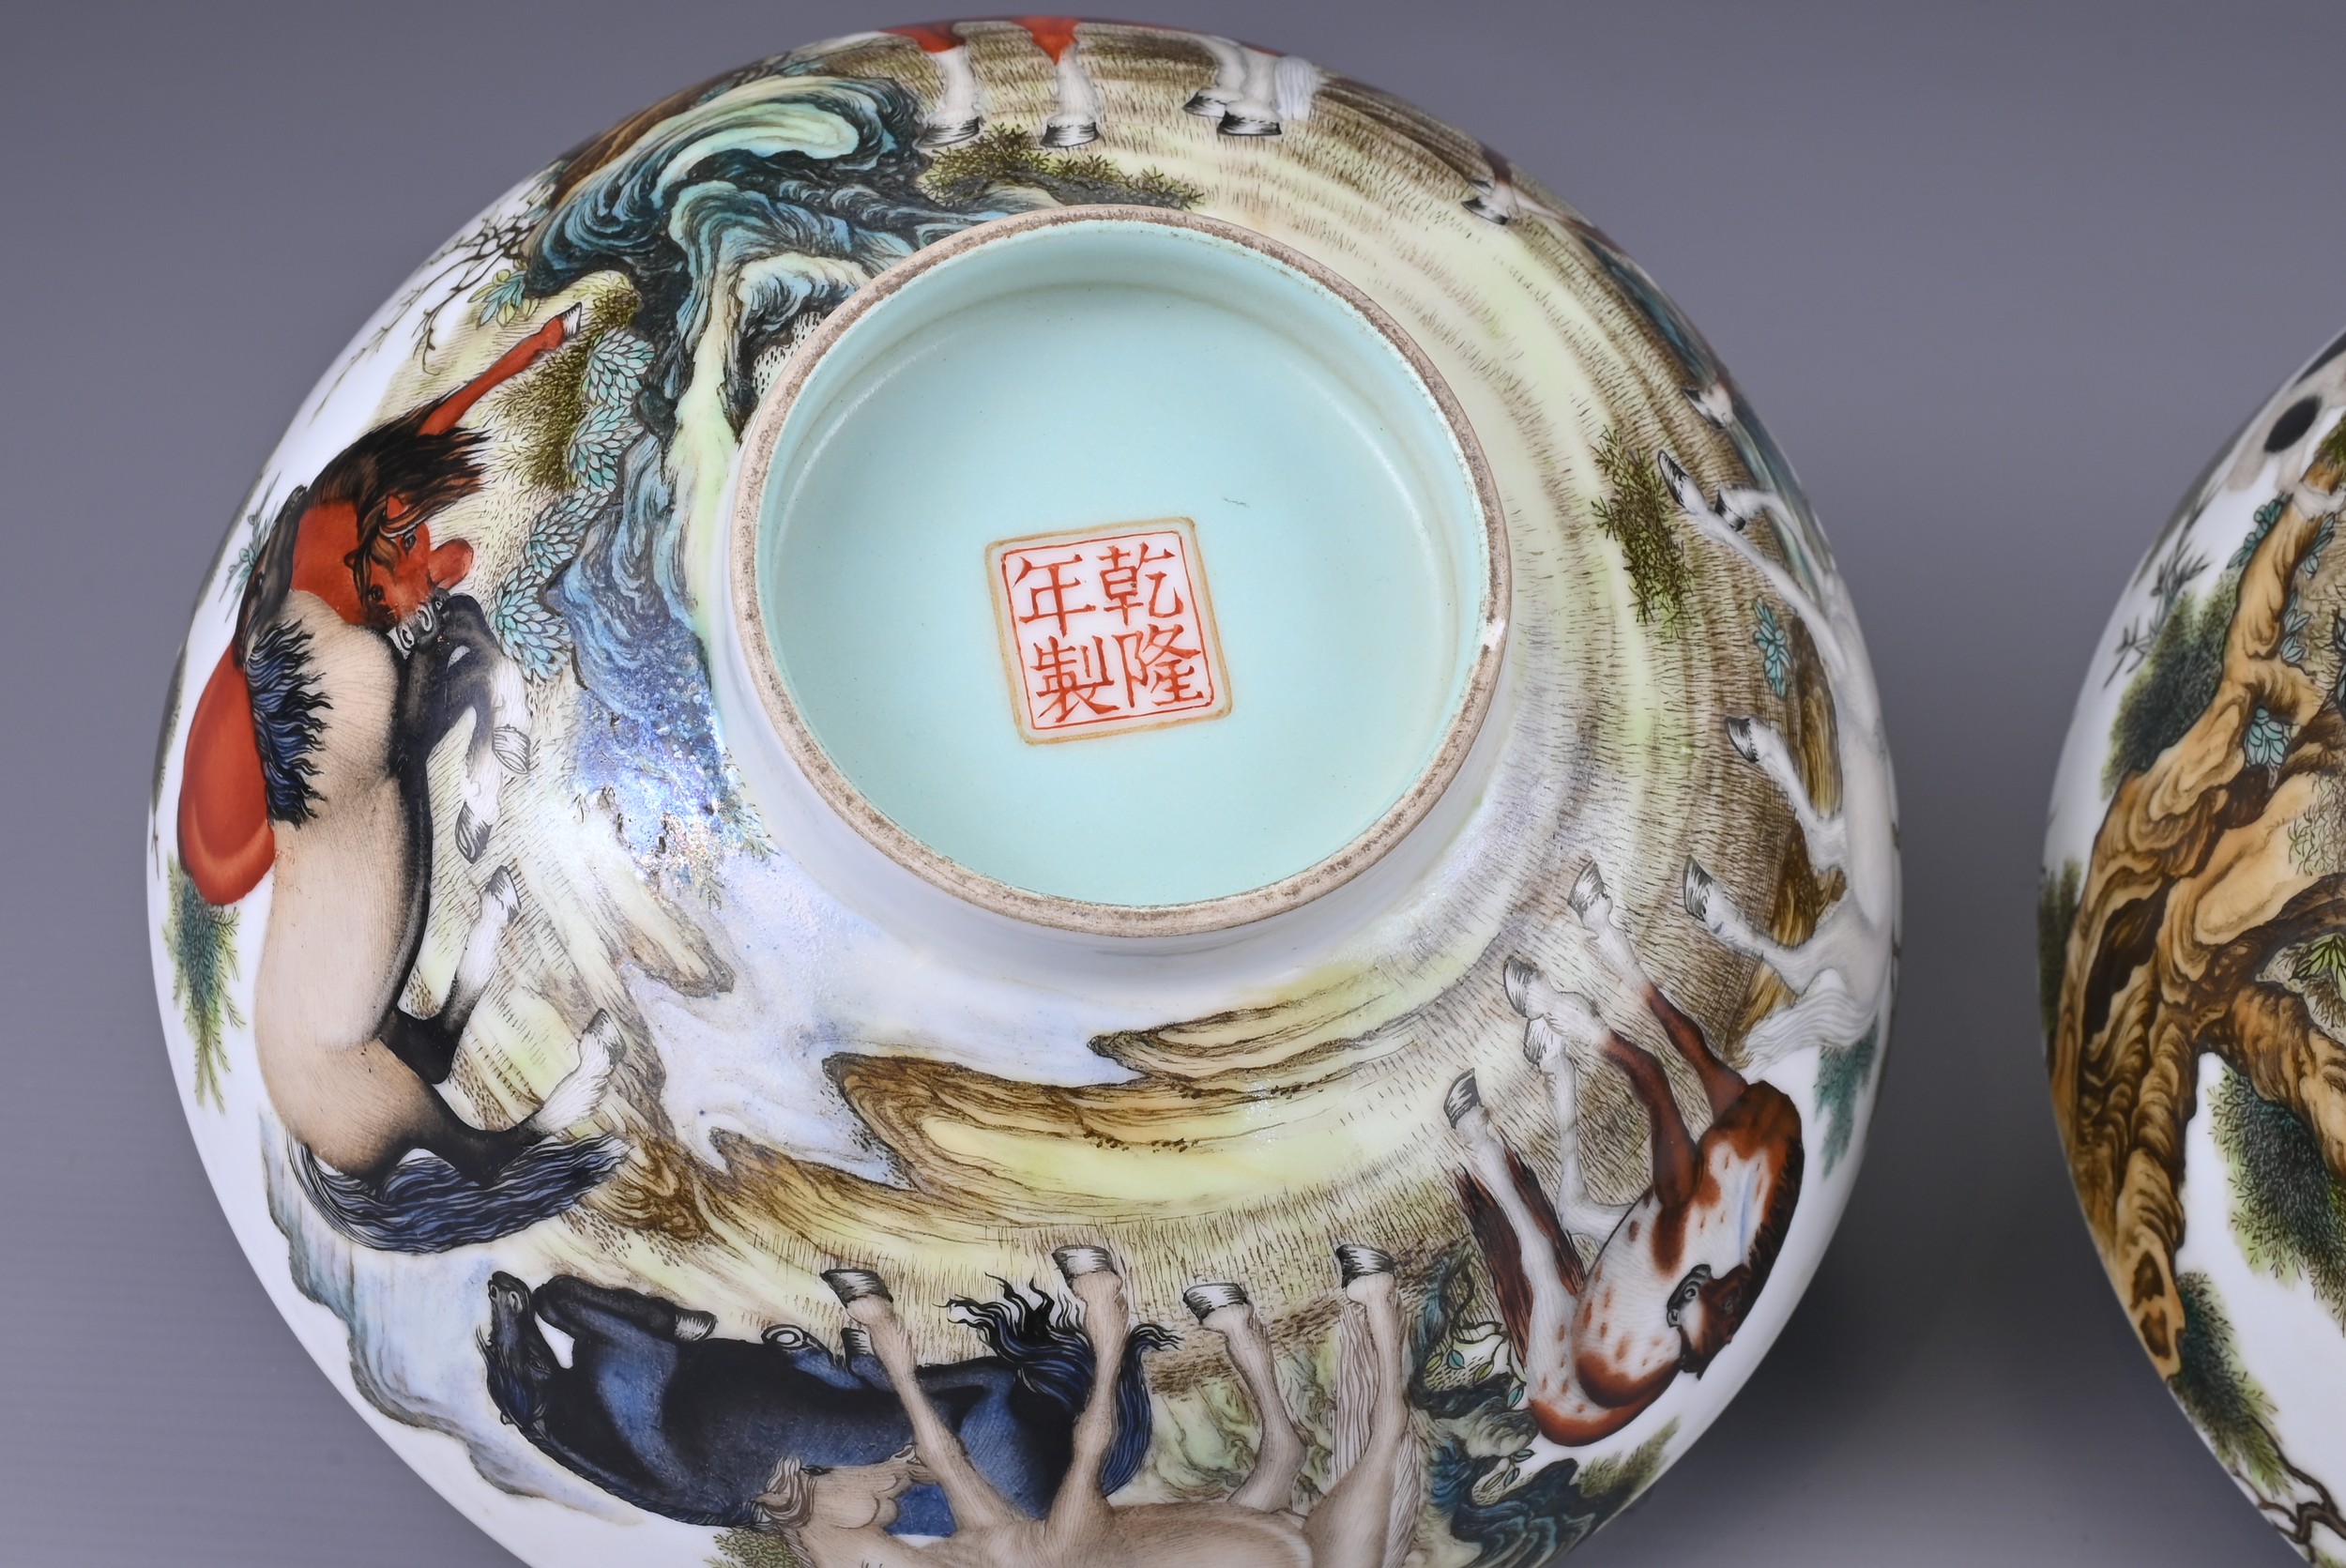 TWO CHINESE PORCELAIN BOWLS, 20TH CENTURY . Each with apocryphal four character Qianlong seal mark - Image 5 of 9